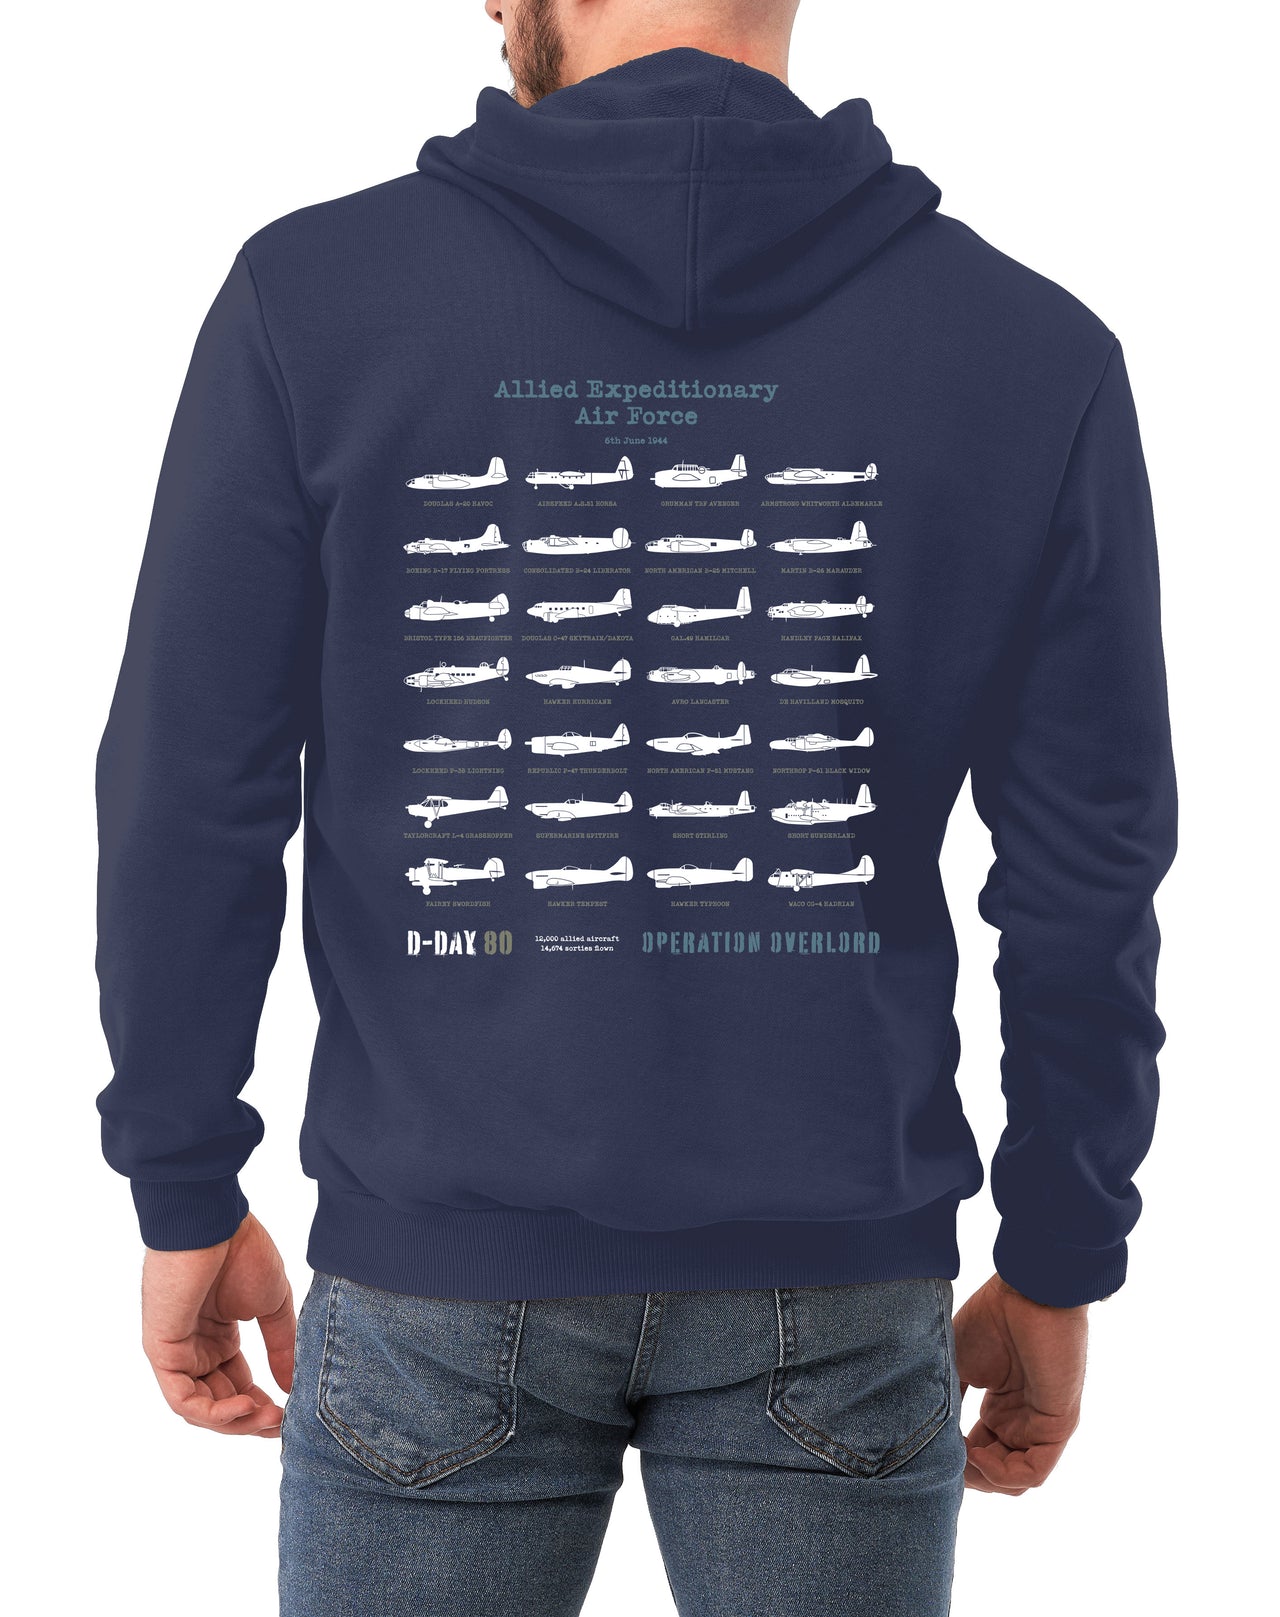 D-Day Spitfire - Hoodie